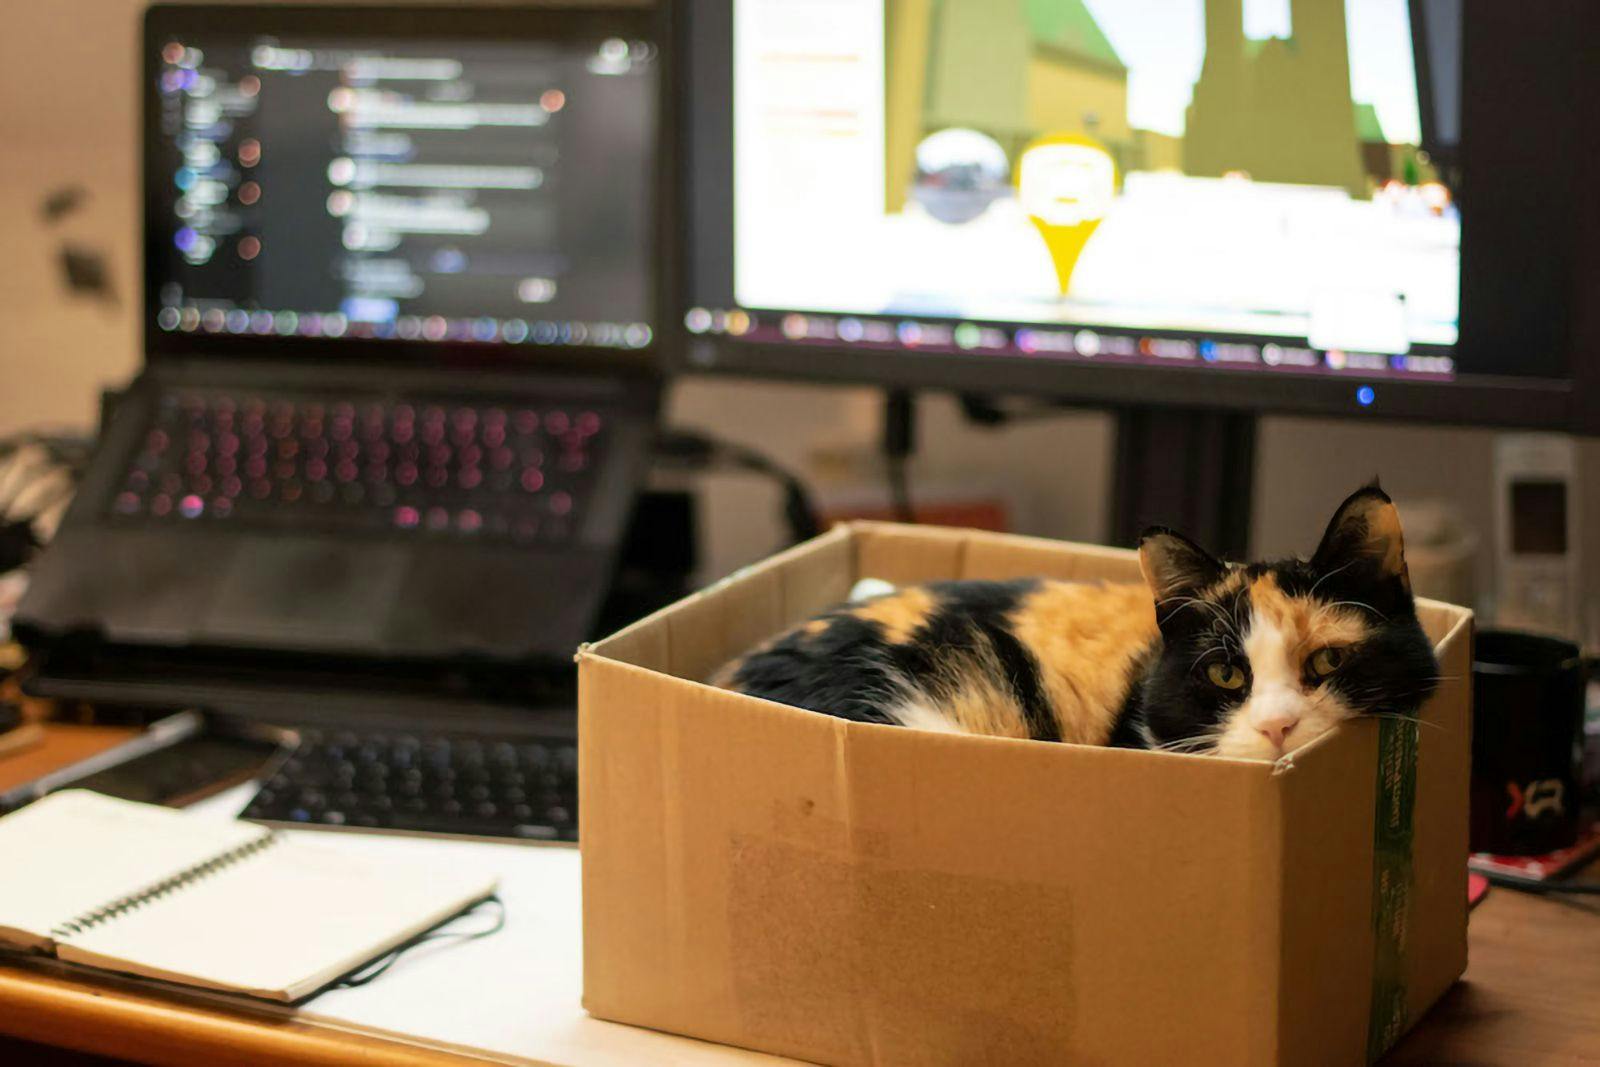 A cat (black, red, and white) sitting in a cardboard box on a desk, with equipment (laptop, keyboard, screen) in the blurry background.